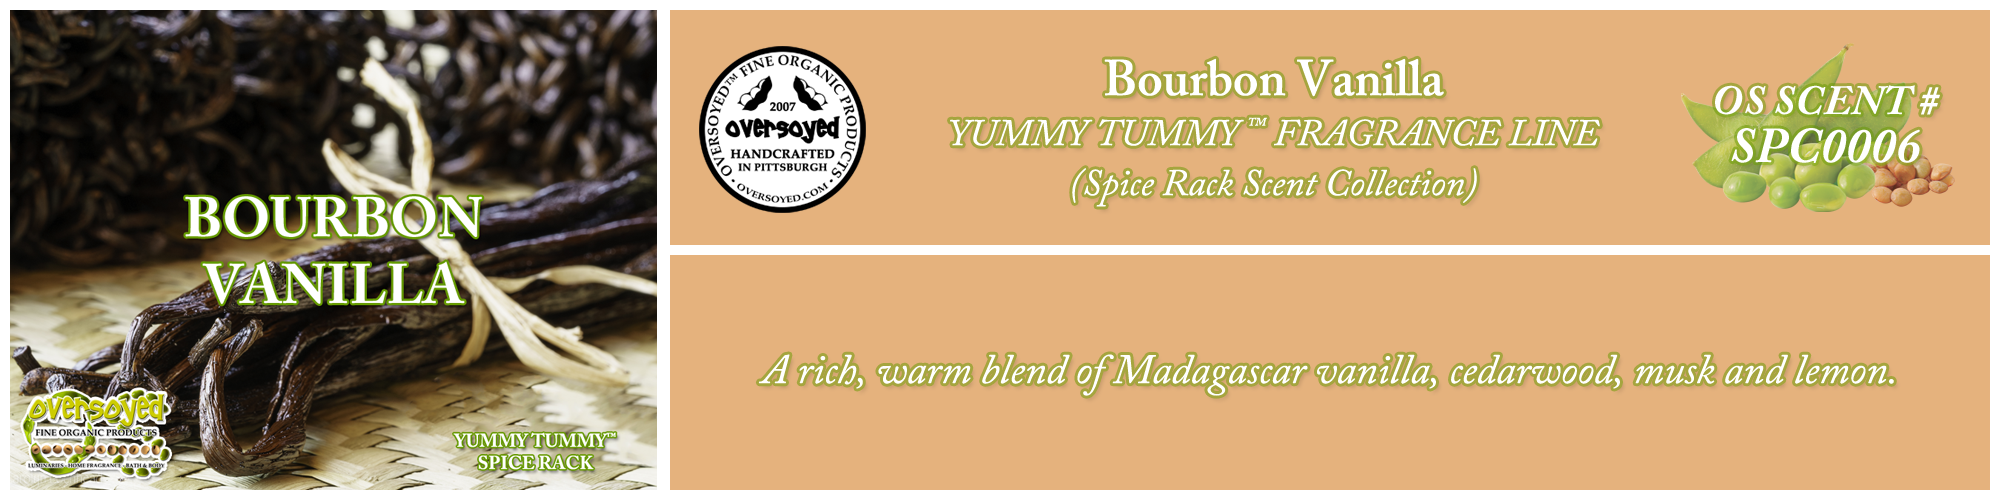 Bourbon Vanilla Handcrafted Products Collection